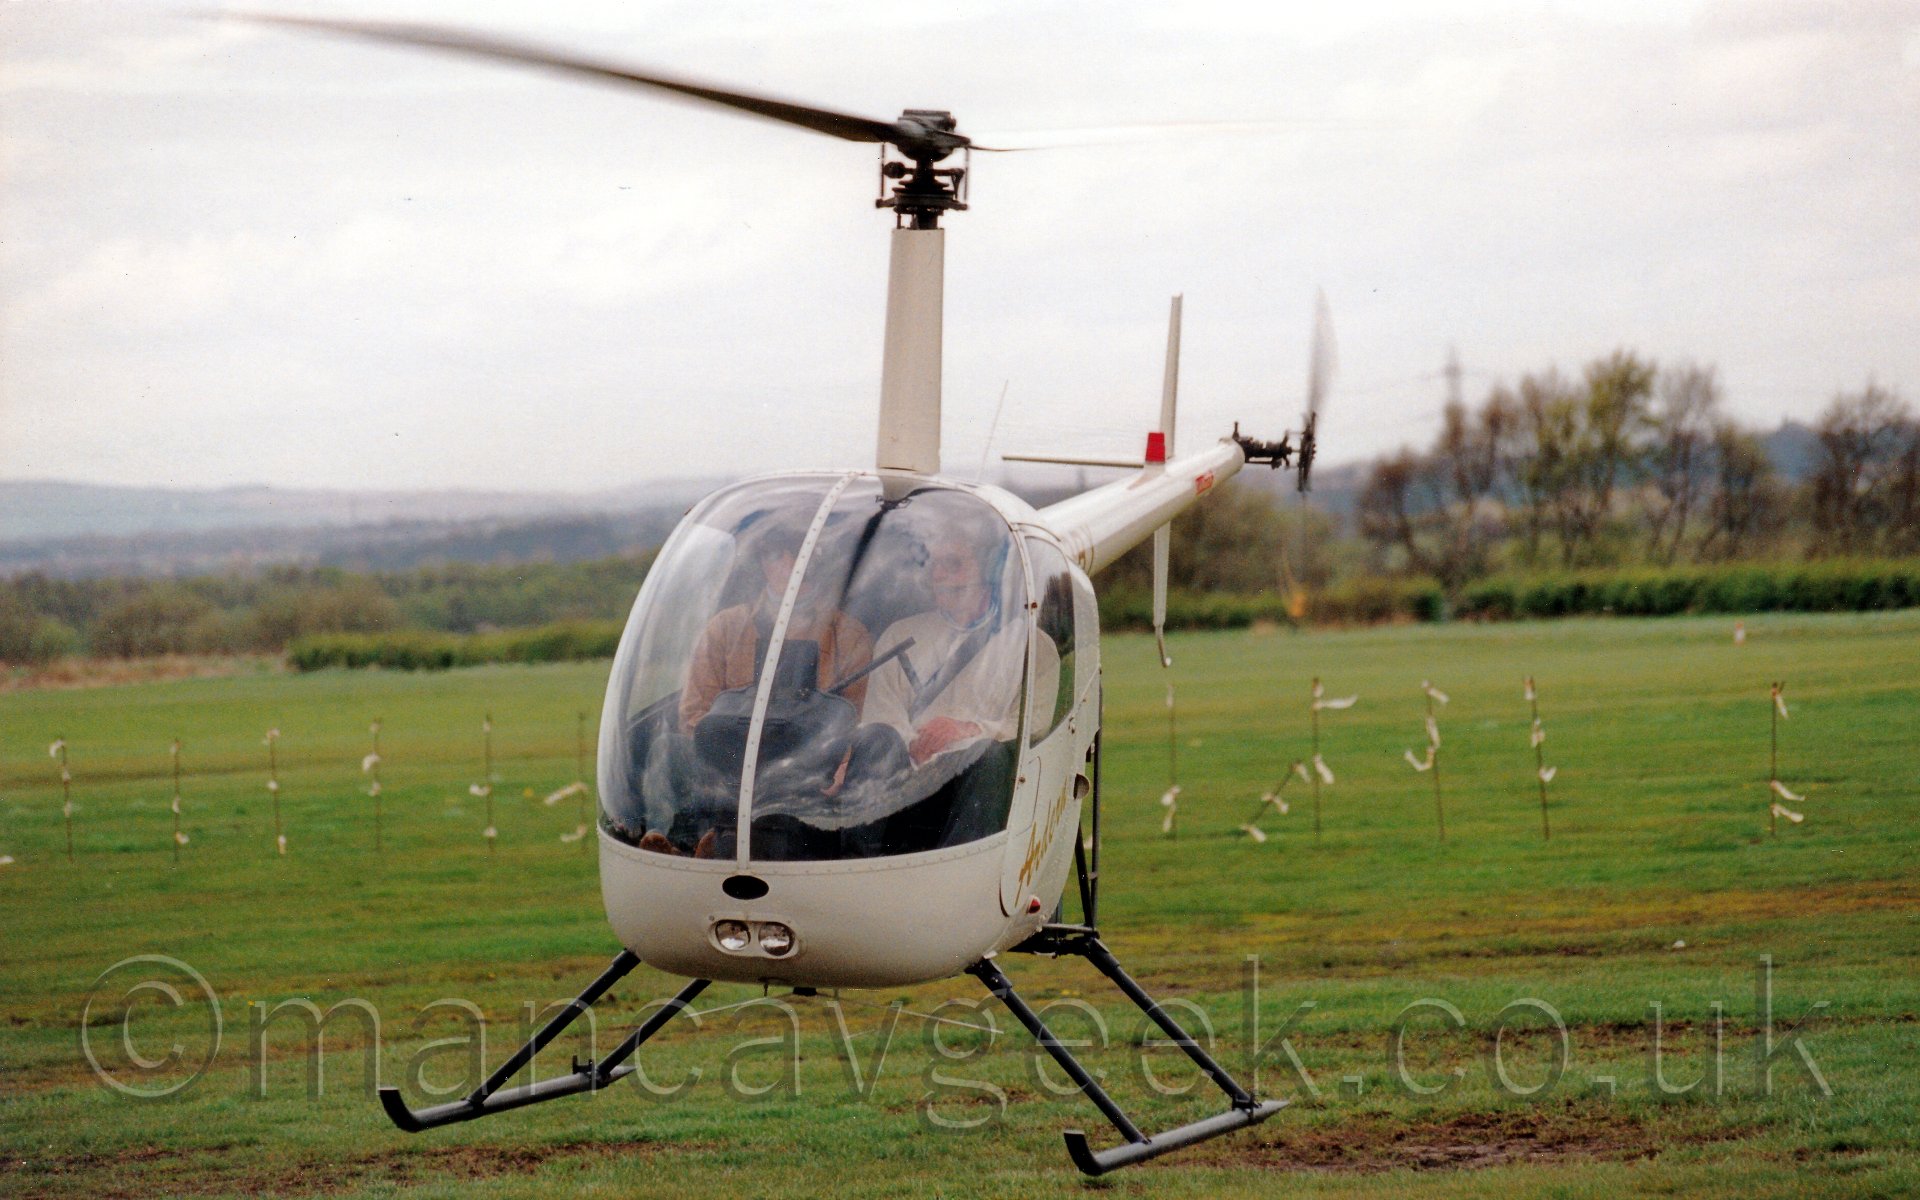 Front view of a small helicopter hovering just inches above the ground. The body, tail boom, and rotor mast are mostly white, with some indeciherable golden writing on the doors. Two people can be seen through the large cockpit windows. In the backgroud, the grass airfield stretches off into the distance, it's perimeter marked by bushes and trees. Metal poles are planted in the ground, with white markers fluttering in the breeze. Rolling hills in the far distance merge with the hazy grey skies.